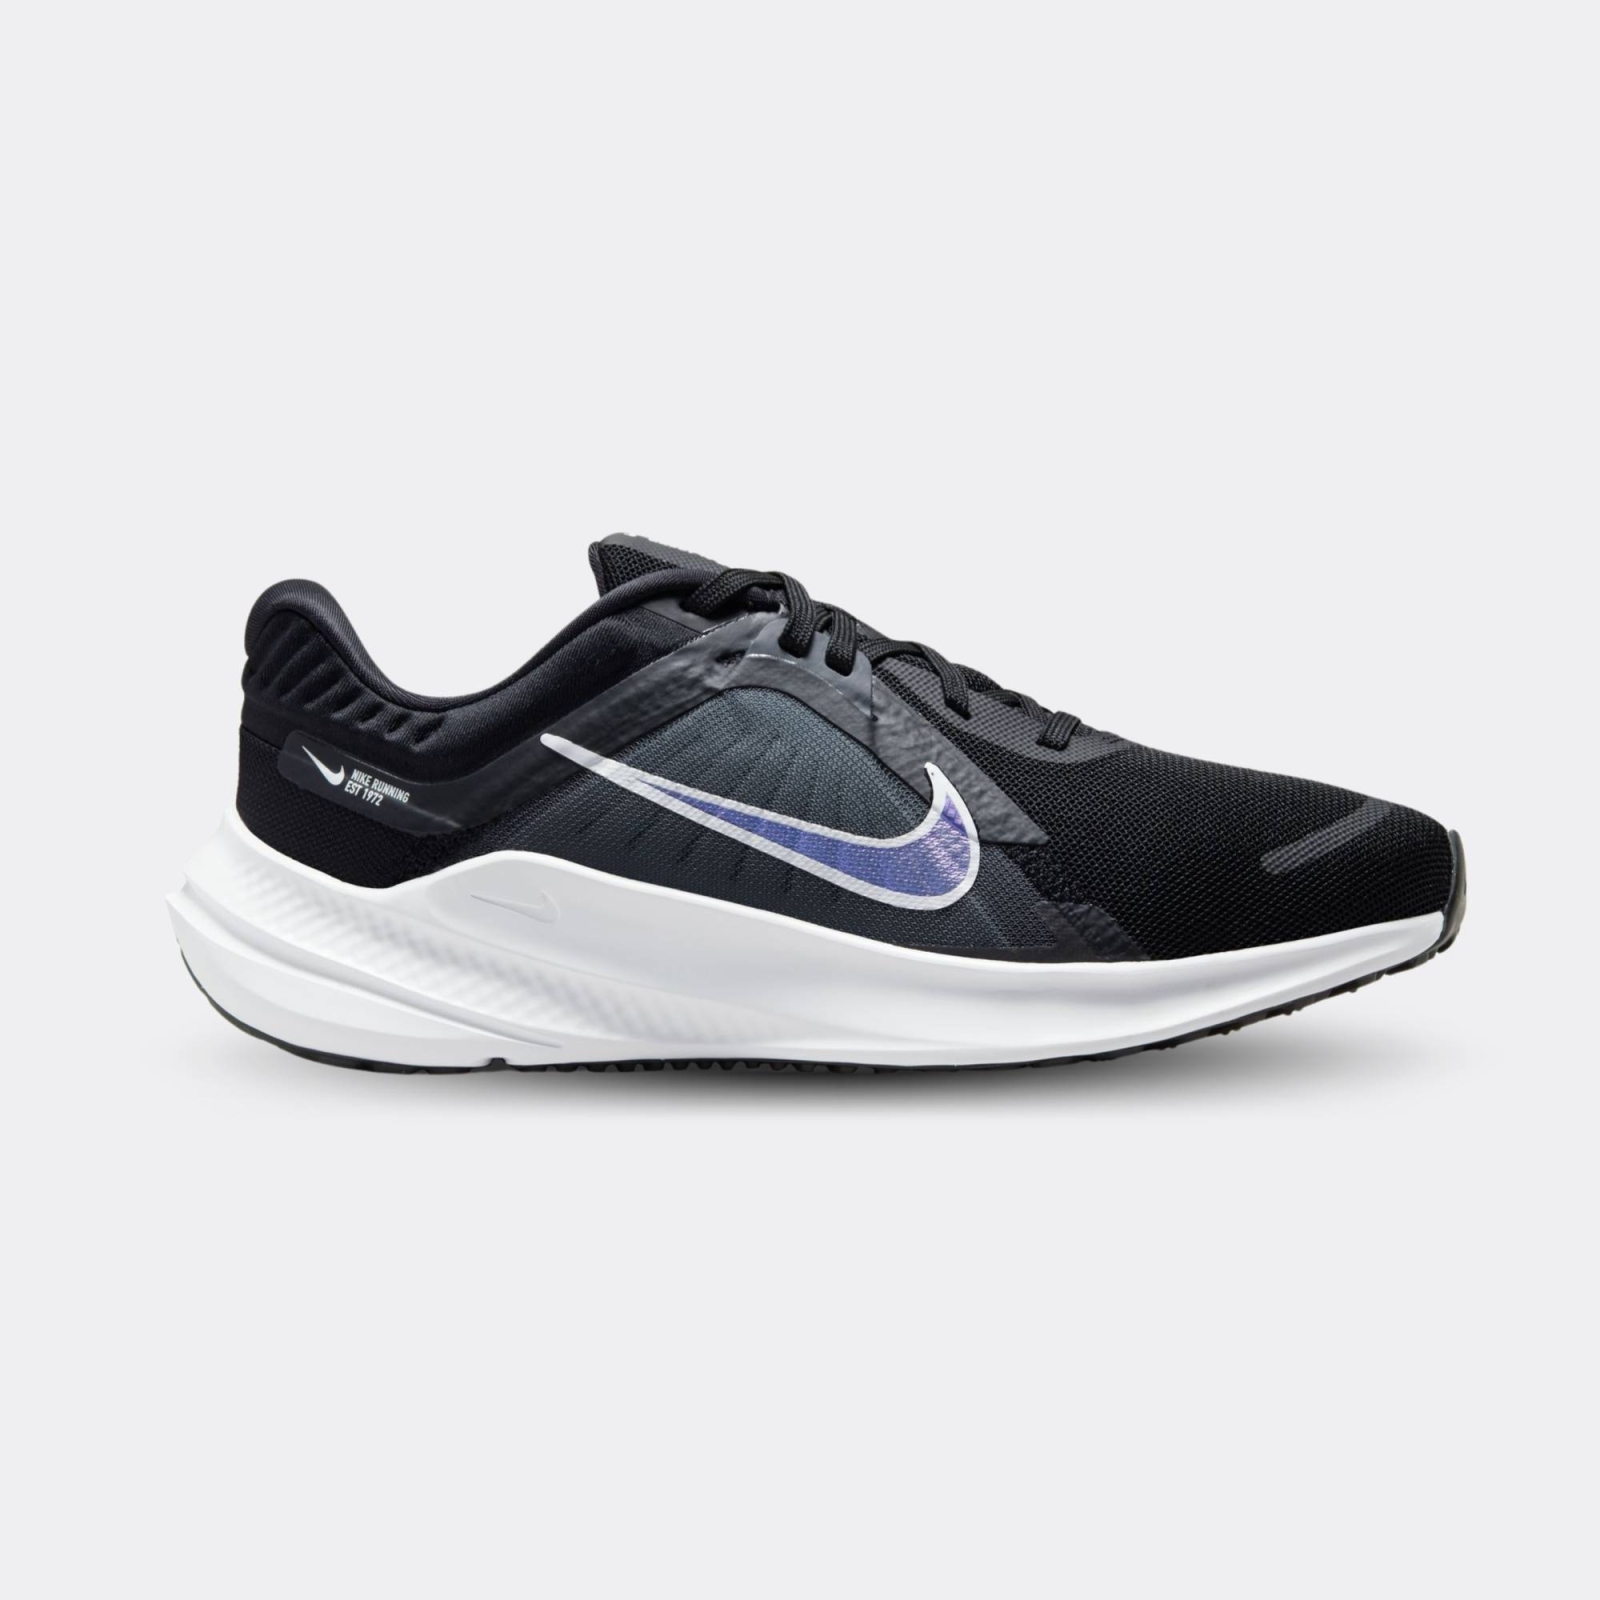 NIKE QUEST 5